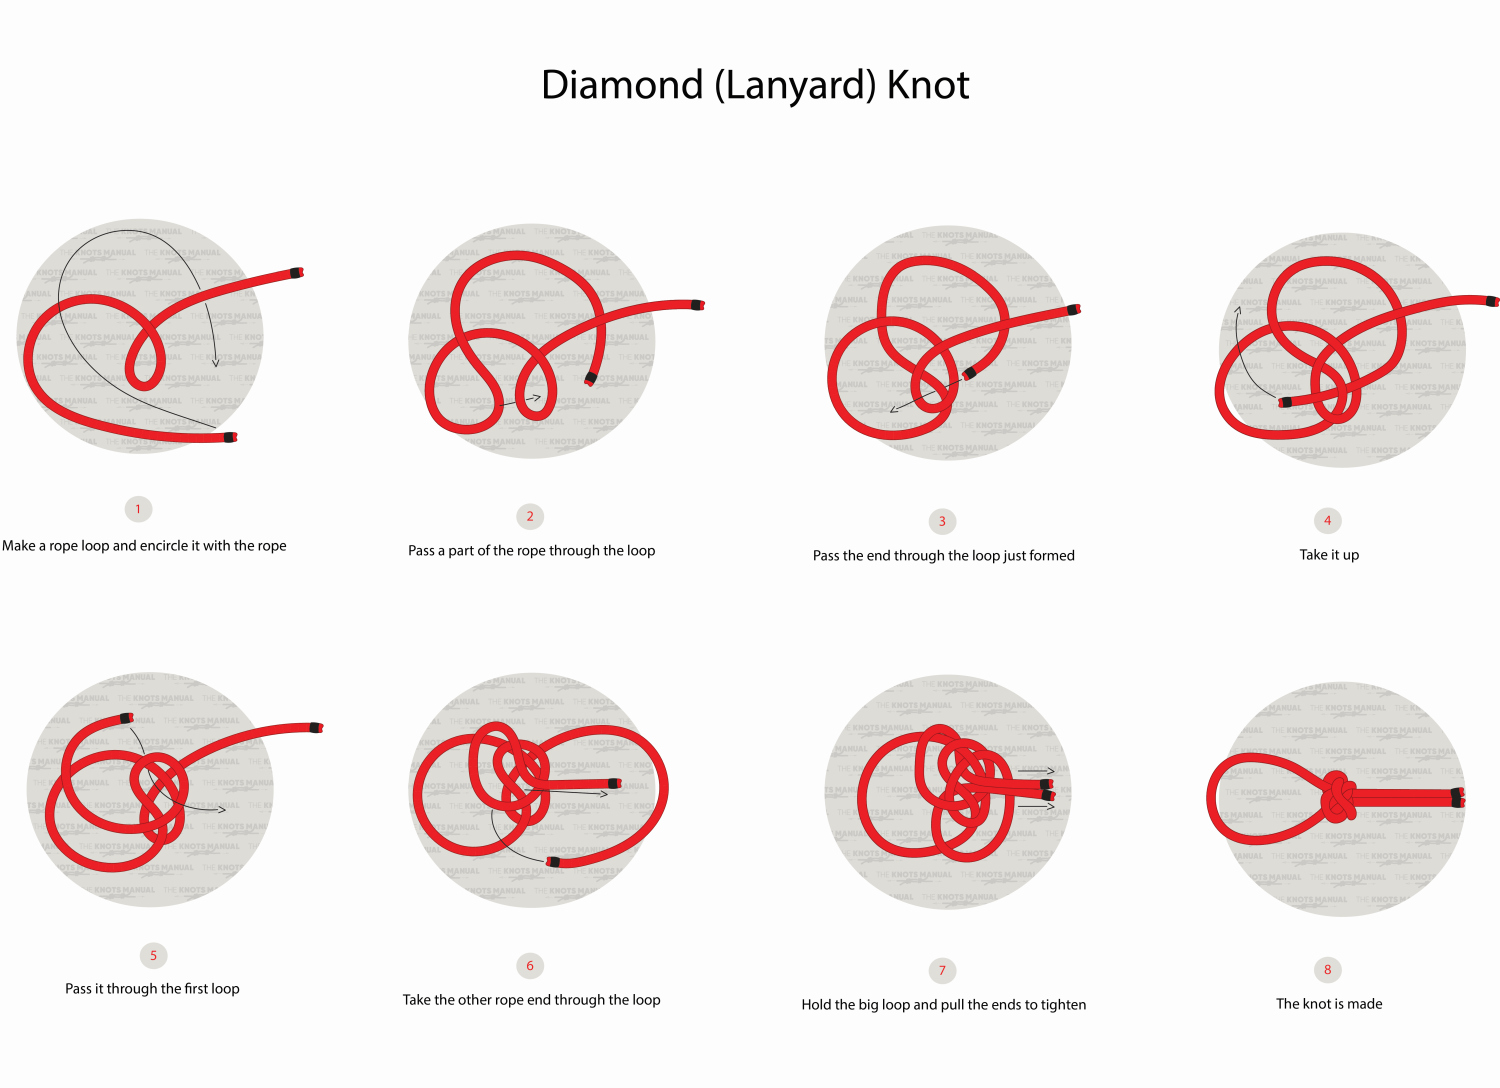 Lanyard Knot Step by step